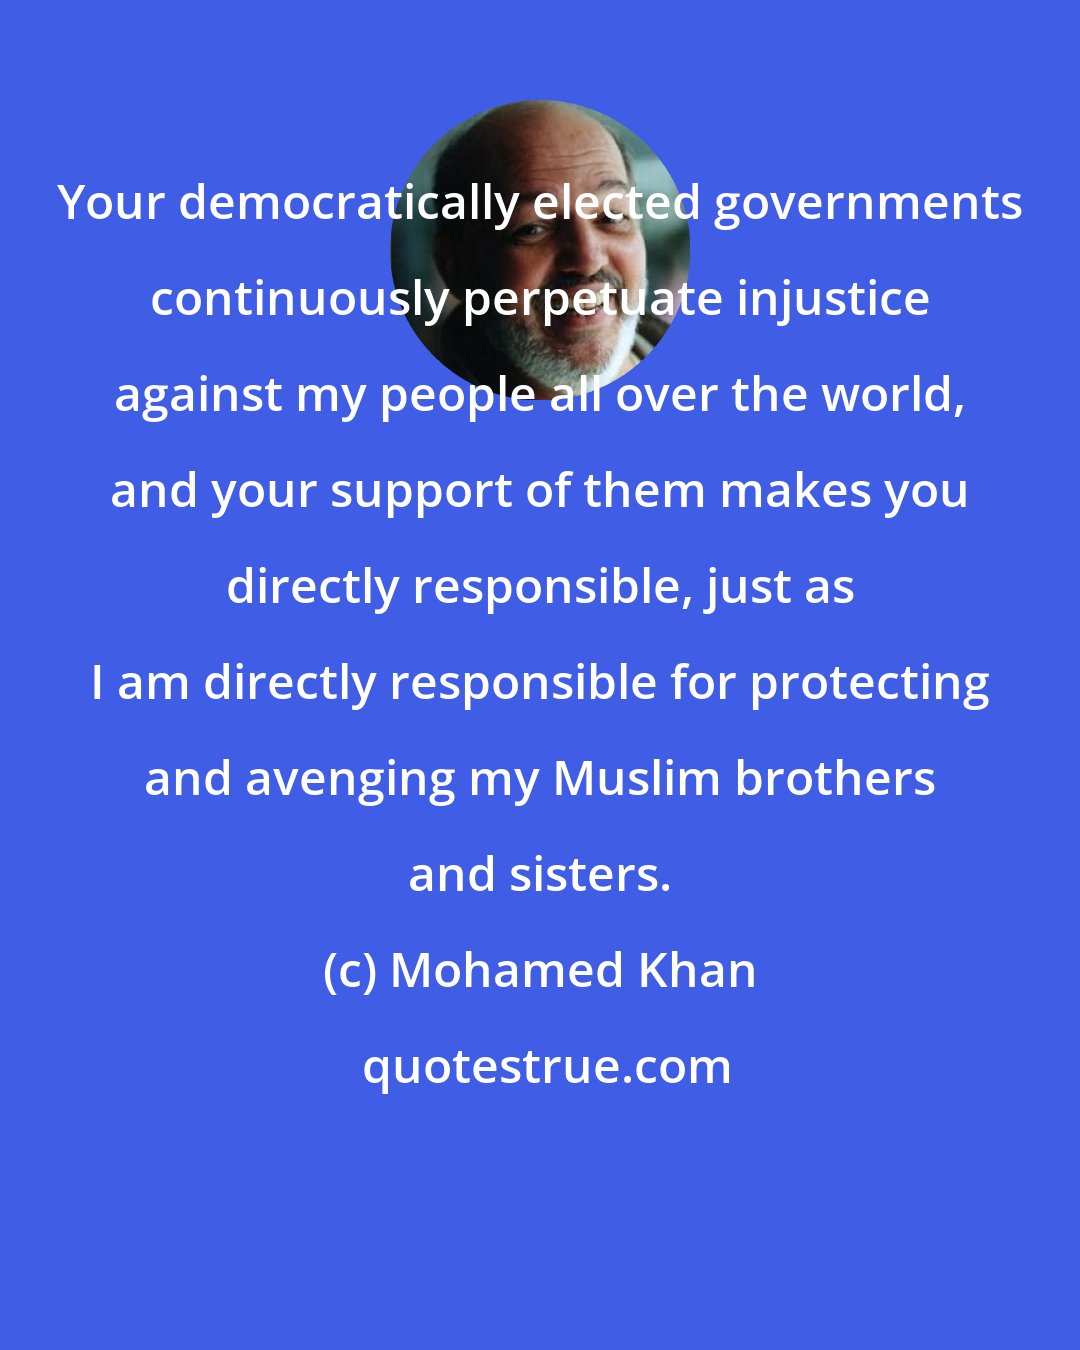 Mohamed Khan: Your democratically elected governments continuously perpetuate injustice against my people all over the world, and your support of them makes you directly responsible, just as I am directly responsible for protecting and avenging my Muslim brothers and sisters.